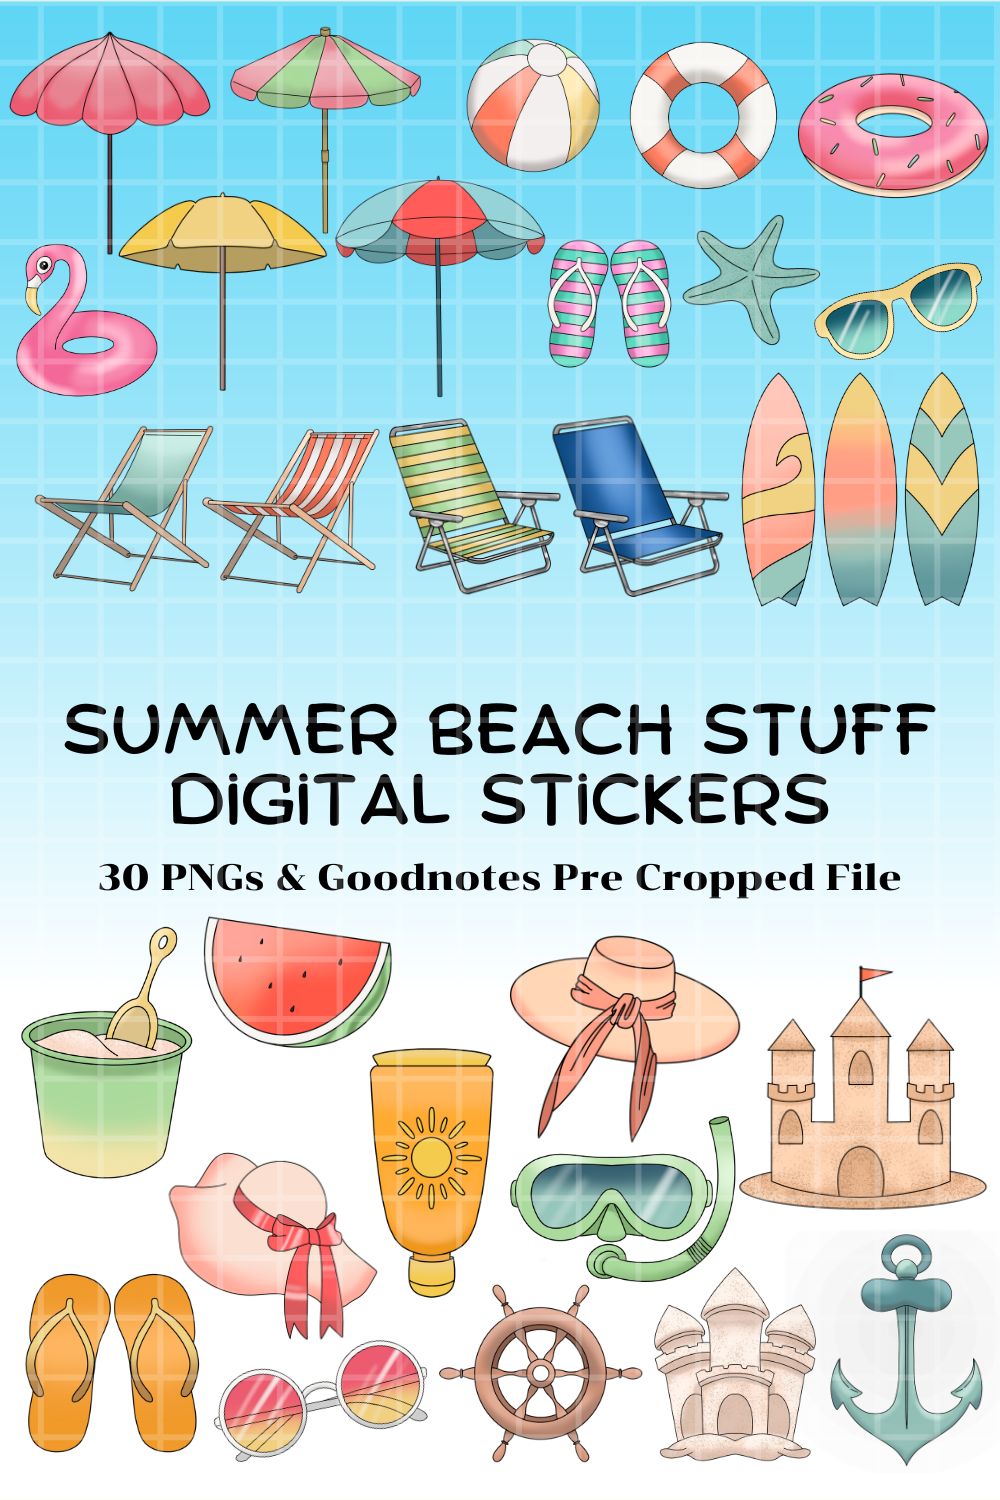 Summer Beach Stuff Digital Stickers - Goodnotes Pre Cropped file & PNG pinterest preview image.